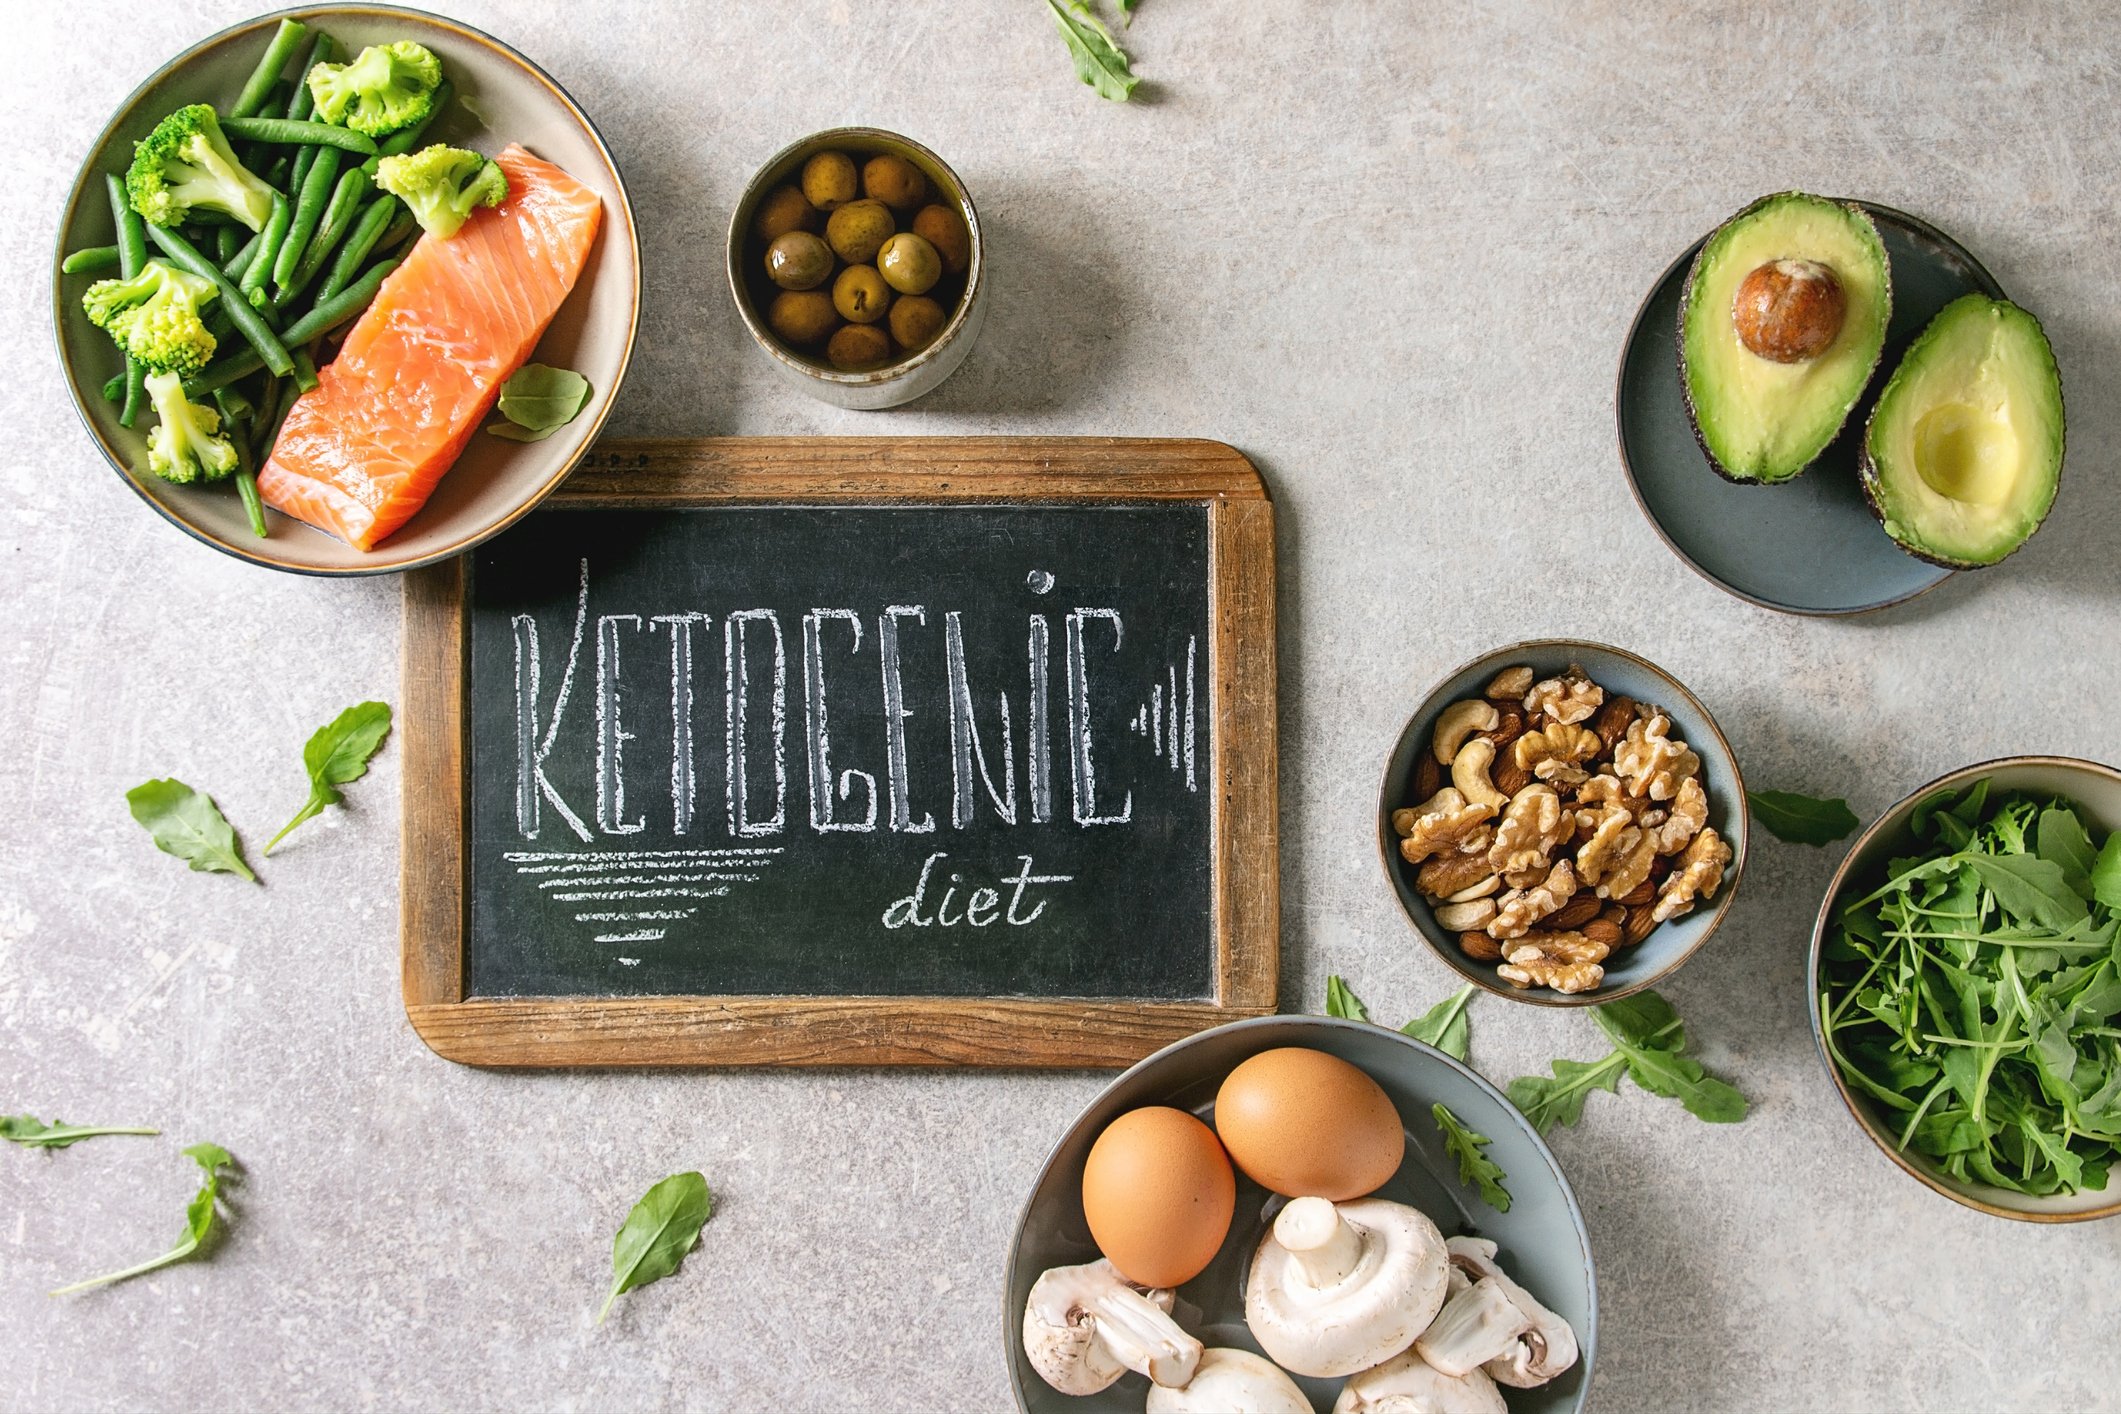 The high-fat, low-carb keto diet has been a growing trend in recent years. (iStock Photo)